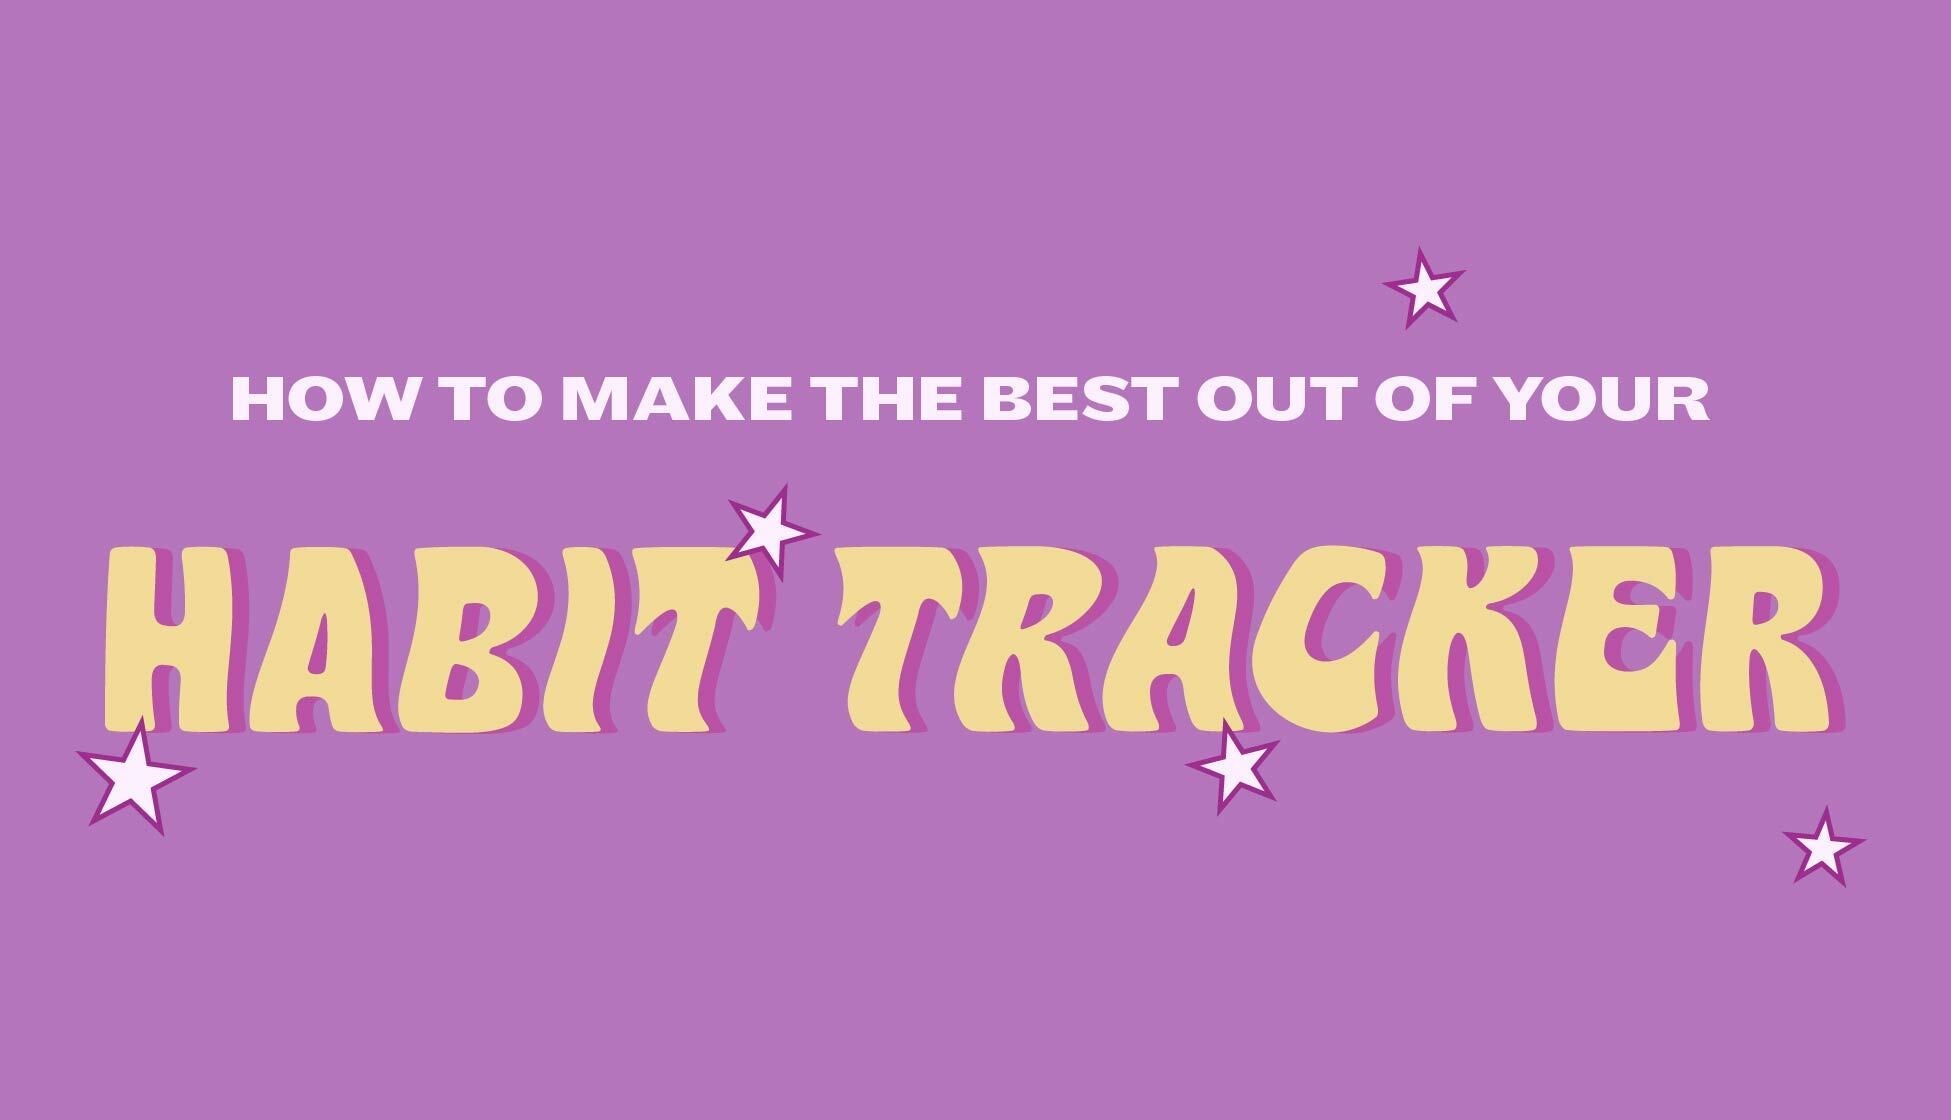 How to Make the Best Out of Your Habit Tracker